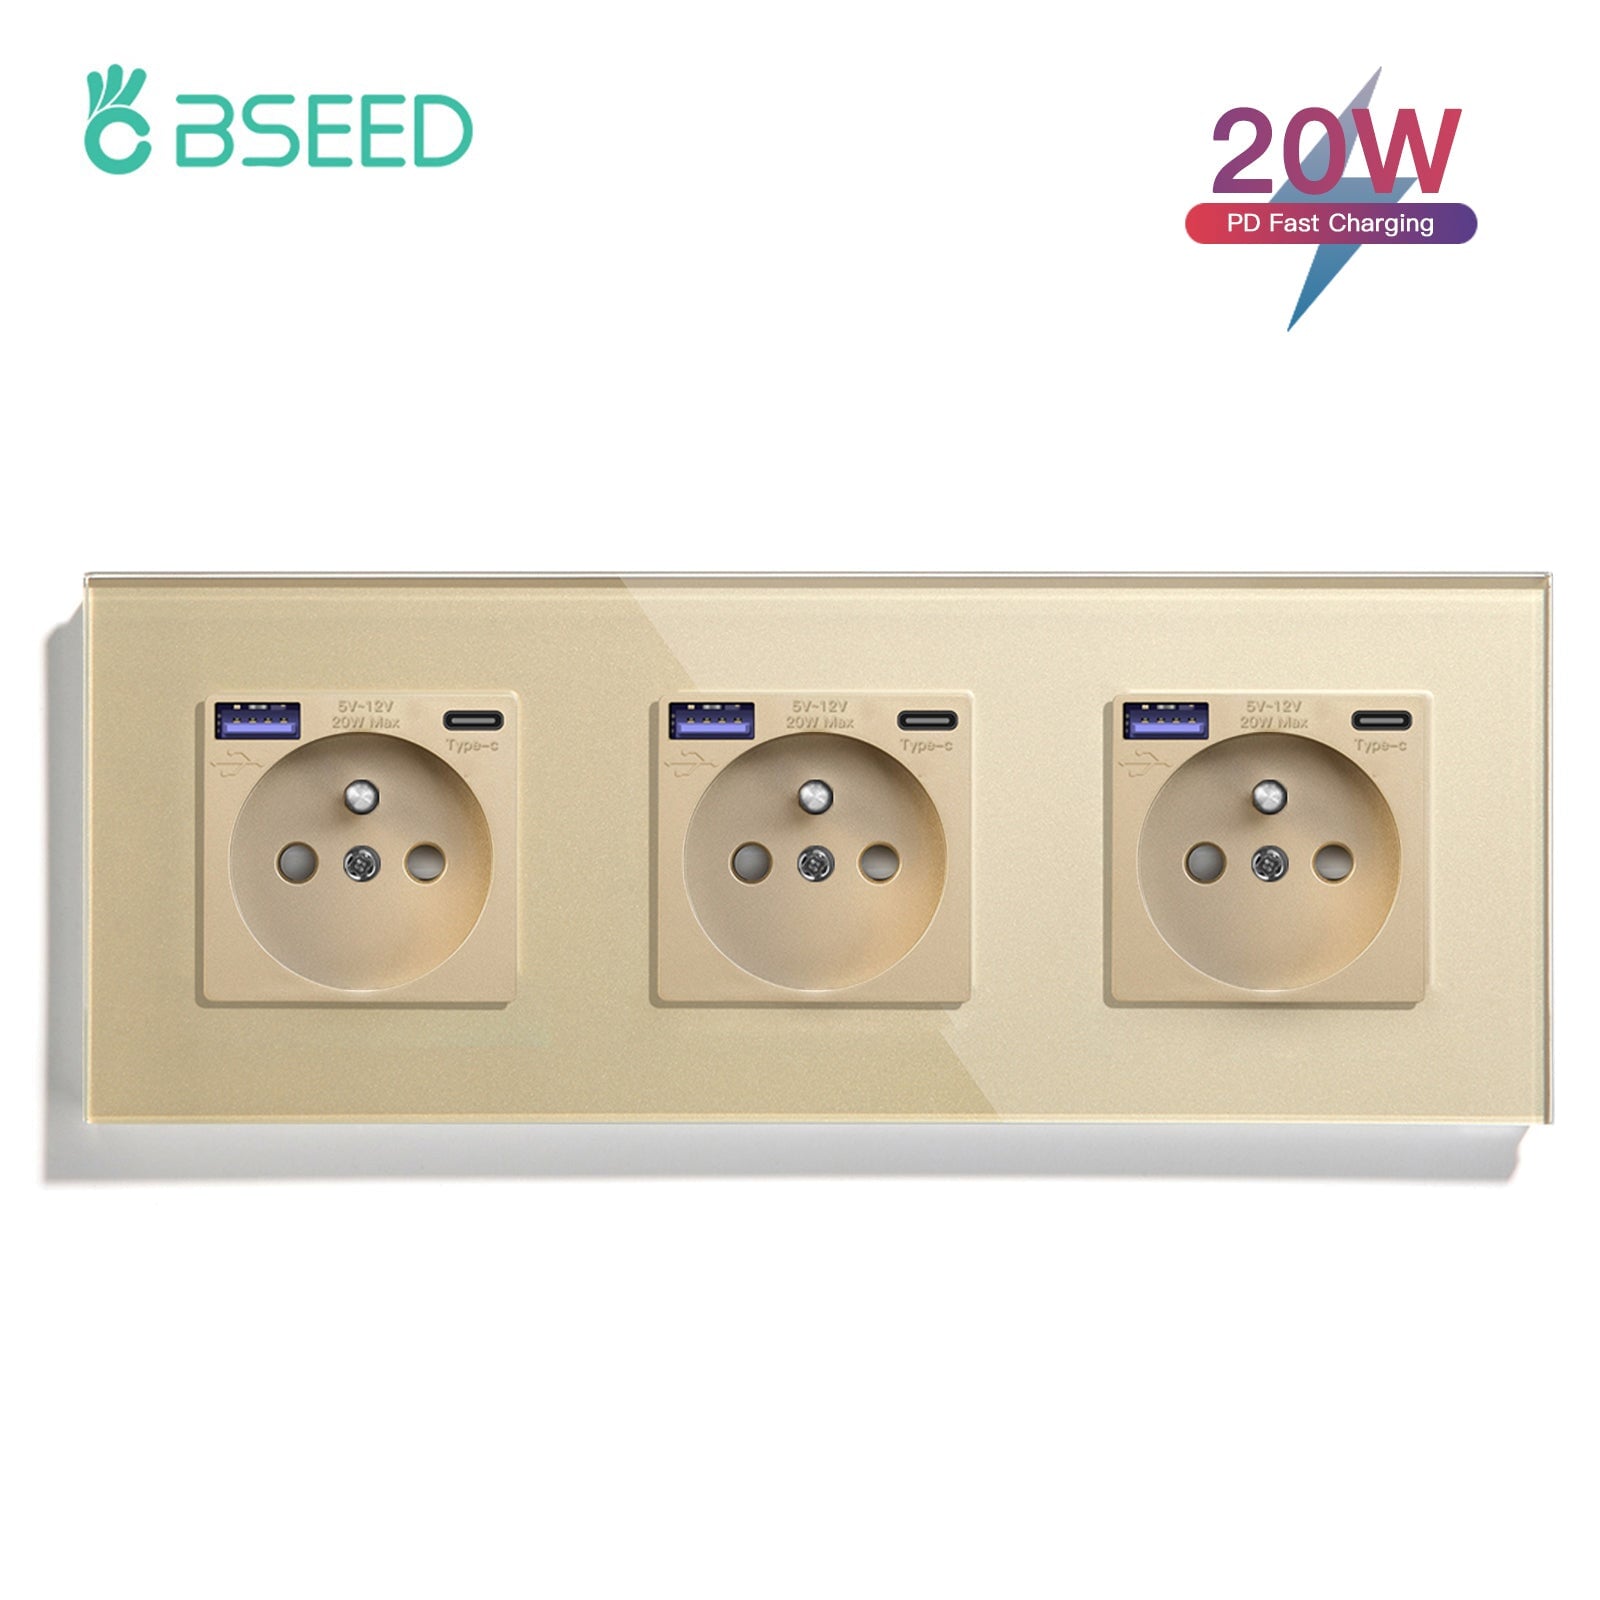 BSEED FR sockets with 20W PD Fast Charge Type-C Interface Outlet Wall Socket Power Outlets & Sockets Bseedswitch Golden Triple 